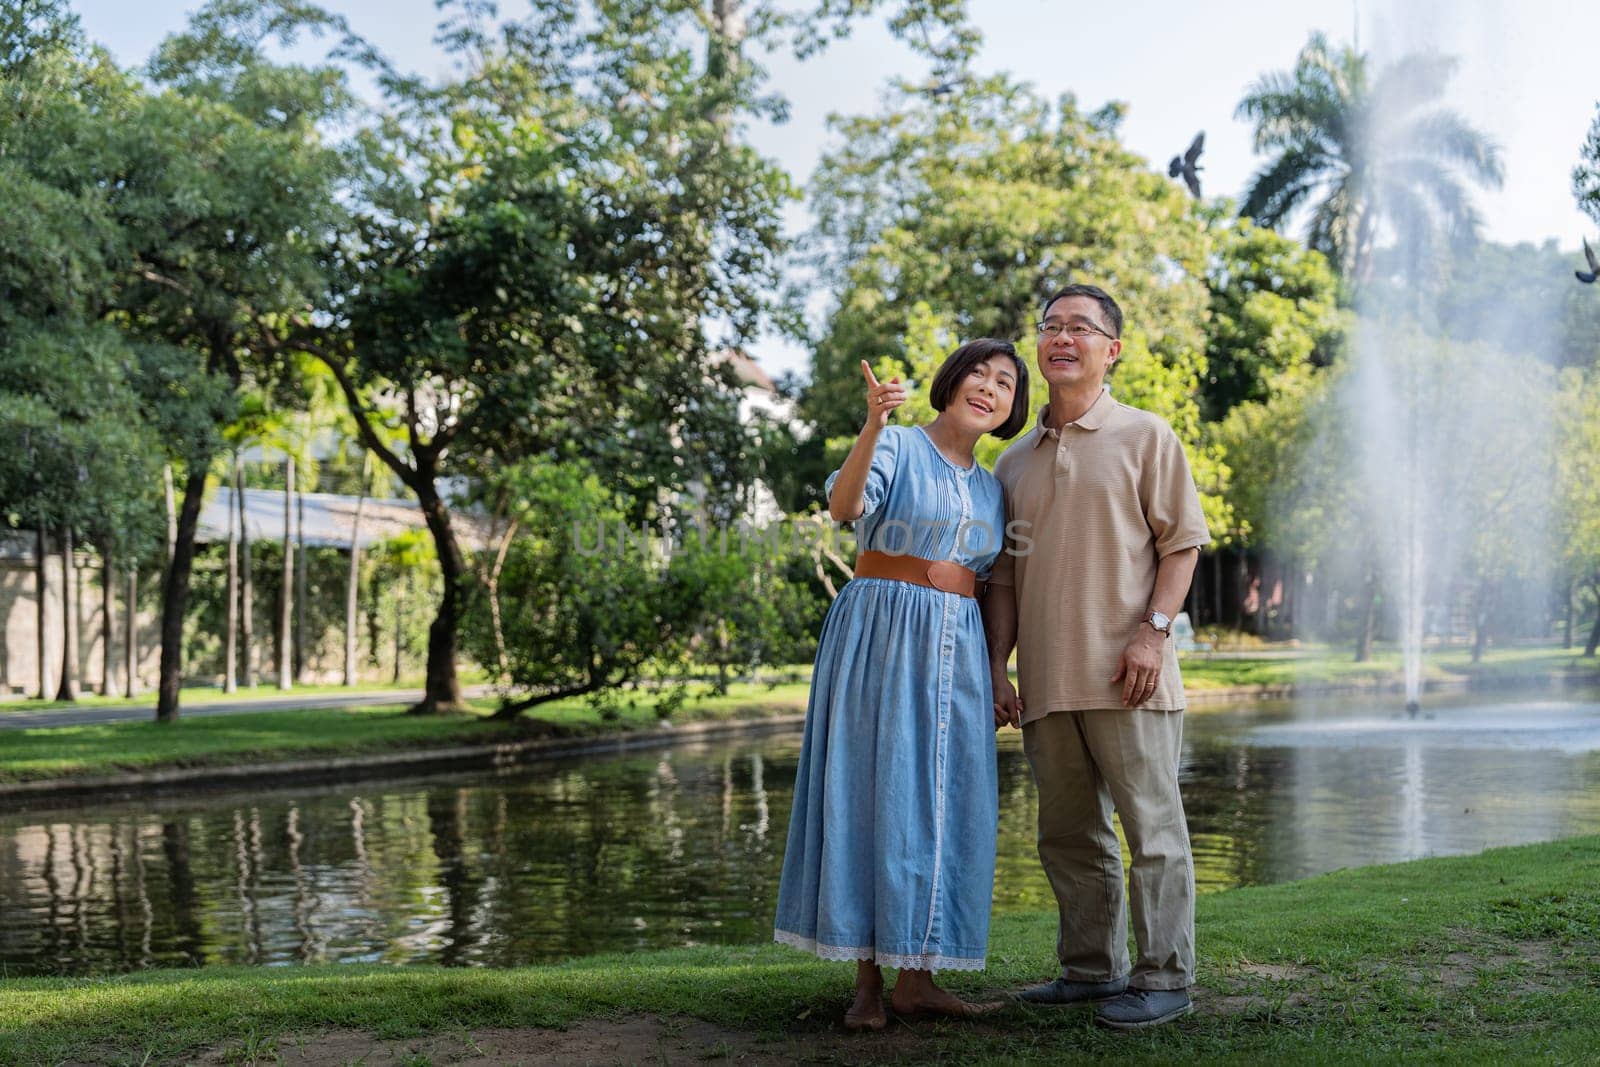 Happy active senior couple having fun outdoors in a park. Portrait of an elderly couple together by nateemee